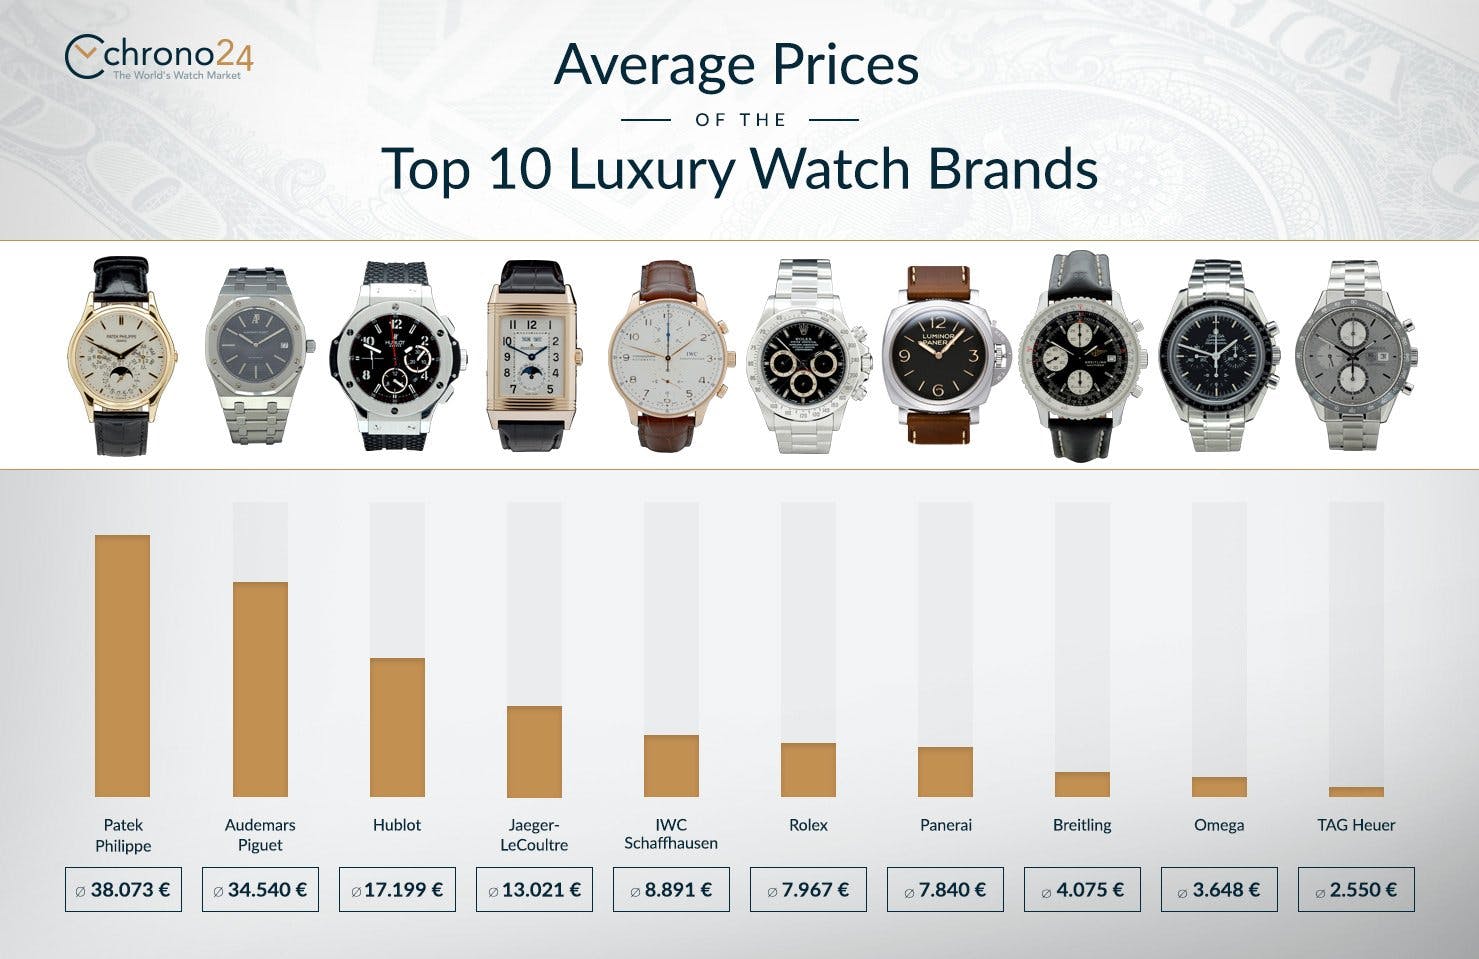 Watches as investment average prices of the top 10 luxury watch brands